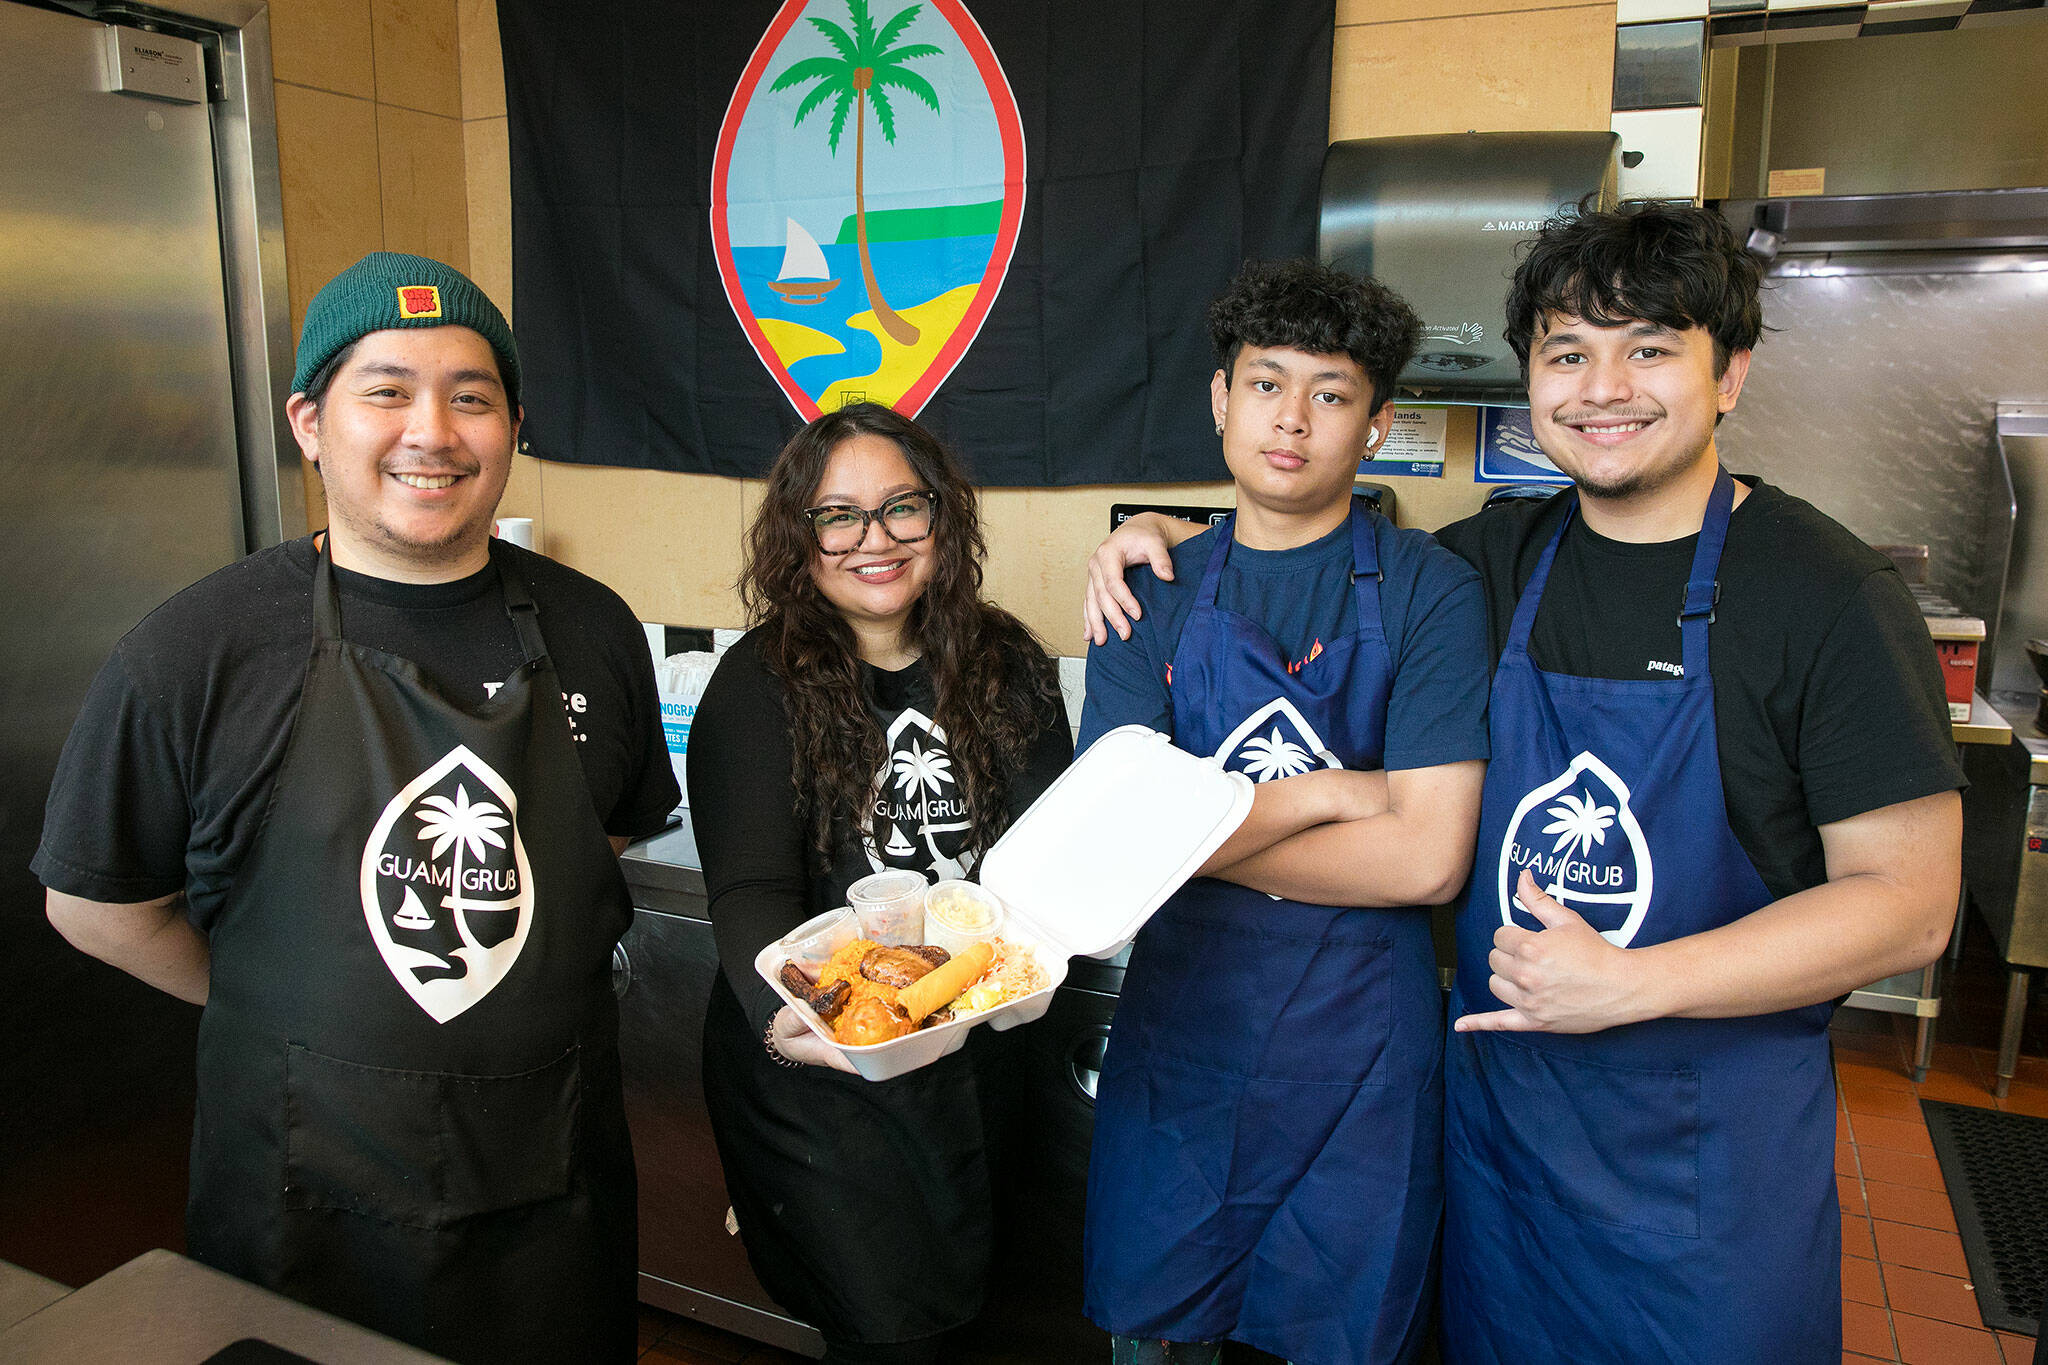 Guam Grub owner and head chef Julita Atoigue-Javier, center left, stands behind the counter with her brother-in-law Angelo Javier, left, and sons Timothy, 13, and John, 21, right, at the Everett Mall. (Ryan Berry / The Herald)